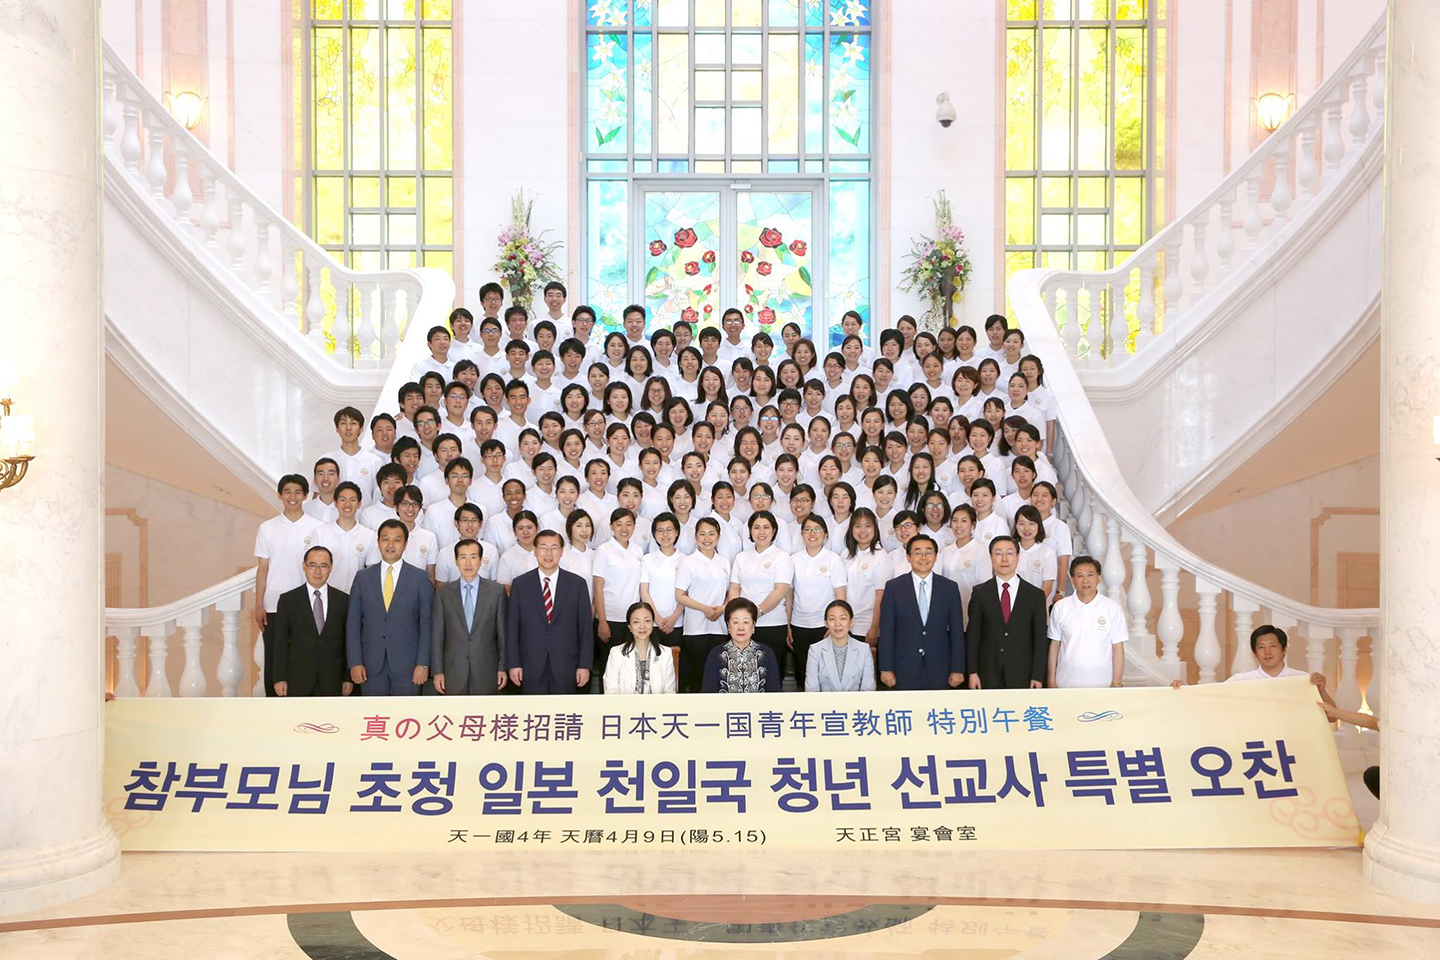 True Parents' Special Banquet for Japanese Cheon Il Guk Youth Missionaries (May 15, 2016 - Cheon Jeong Gung)